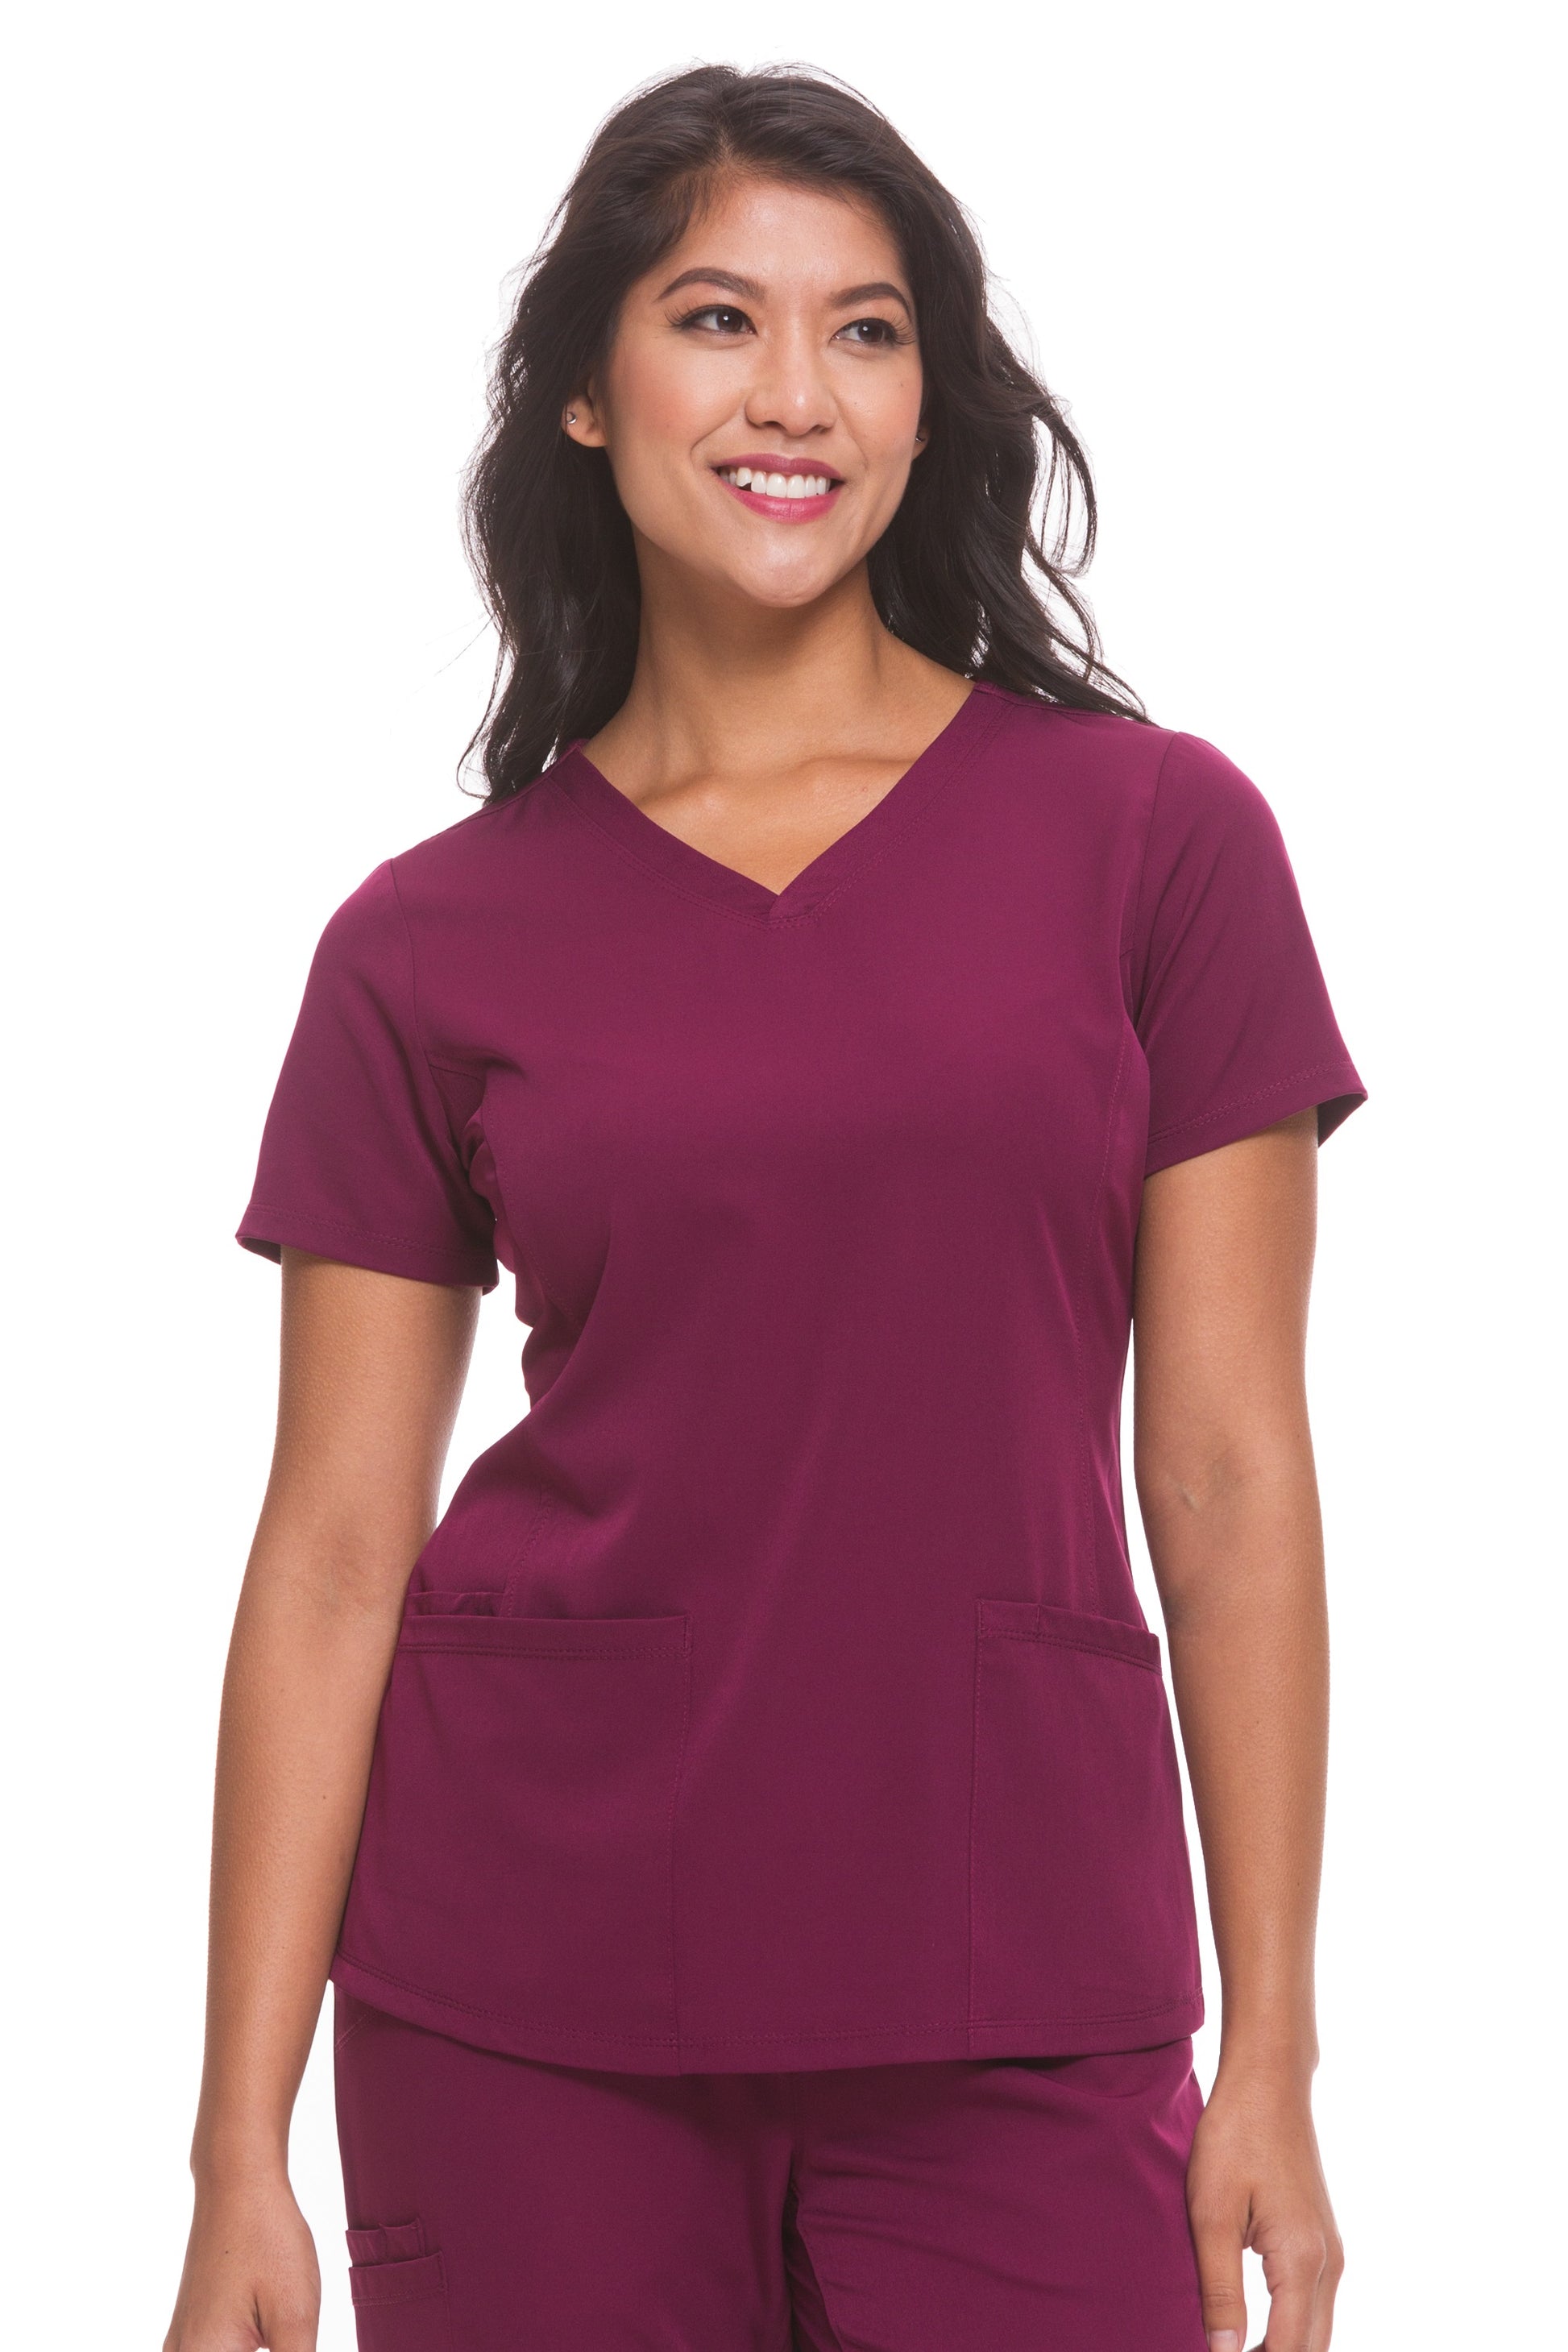 Healing Hands HH Works Monica V-Neck Scrub Top in Wine at Parker's Clothing and Shoes